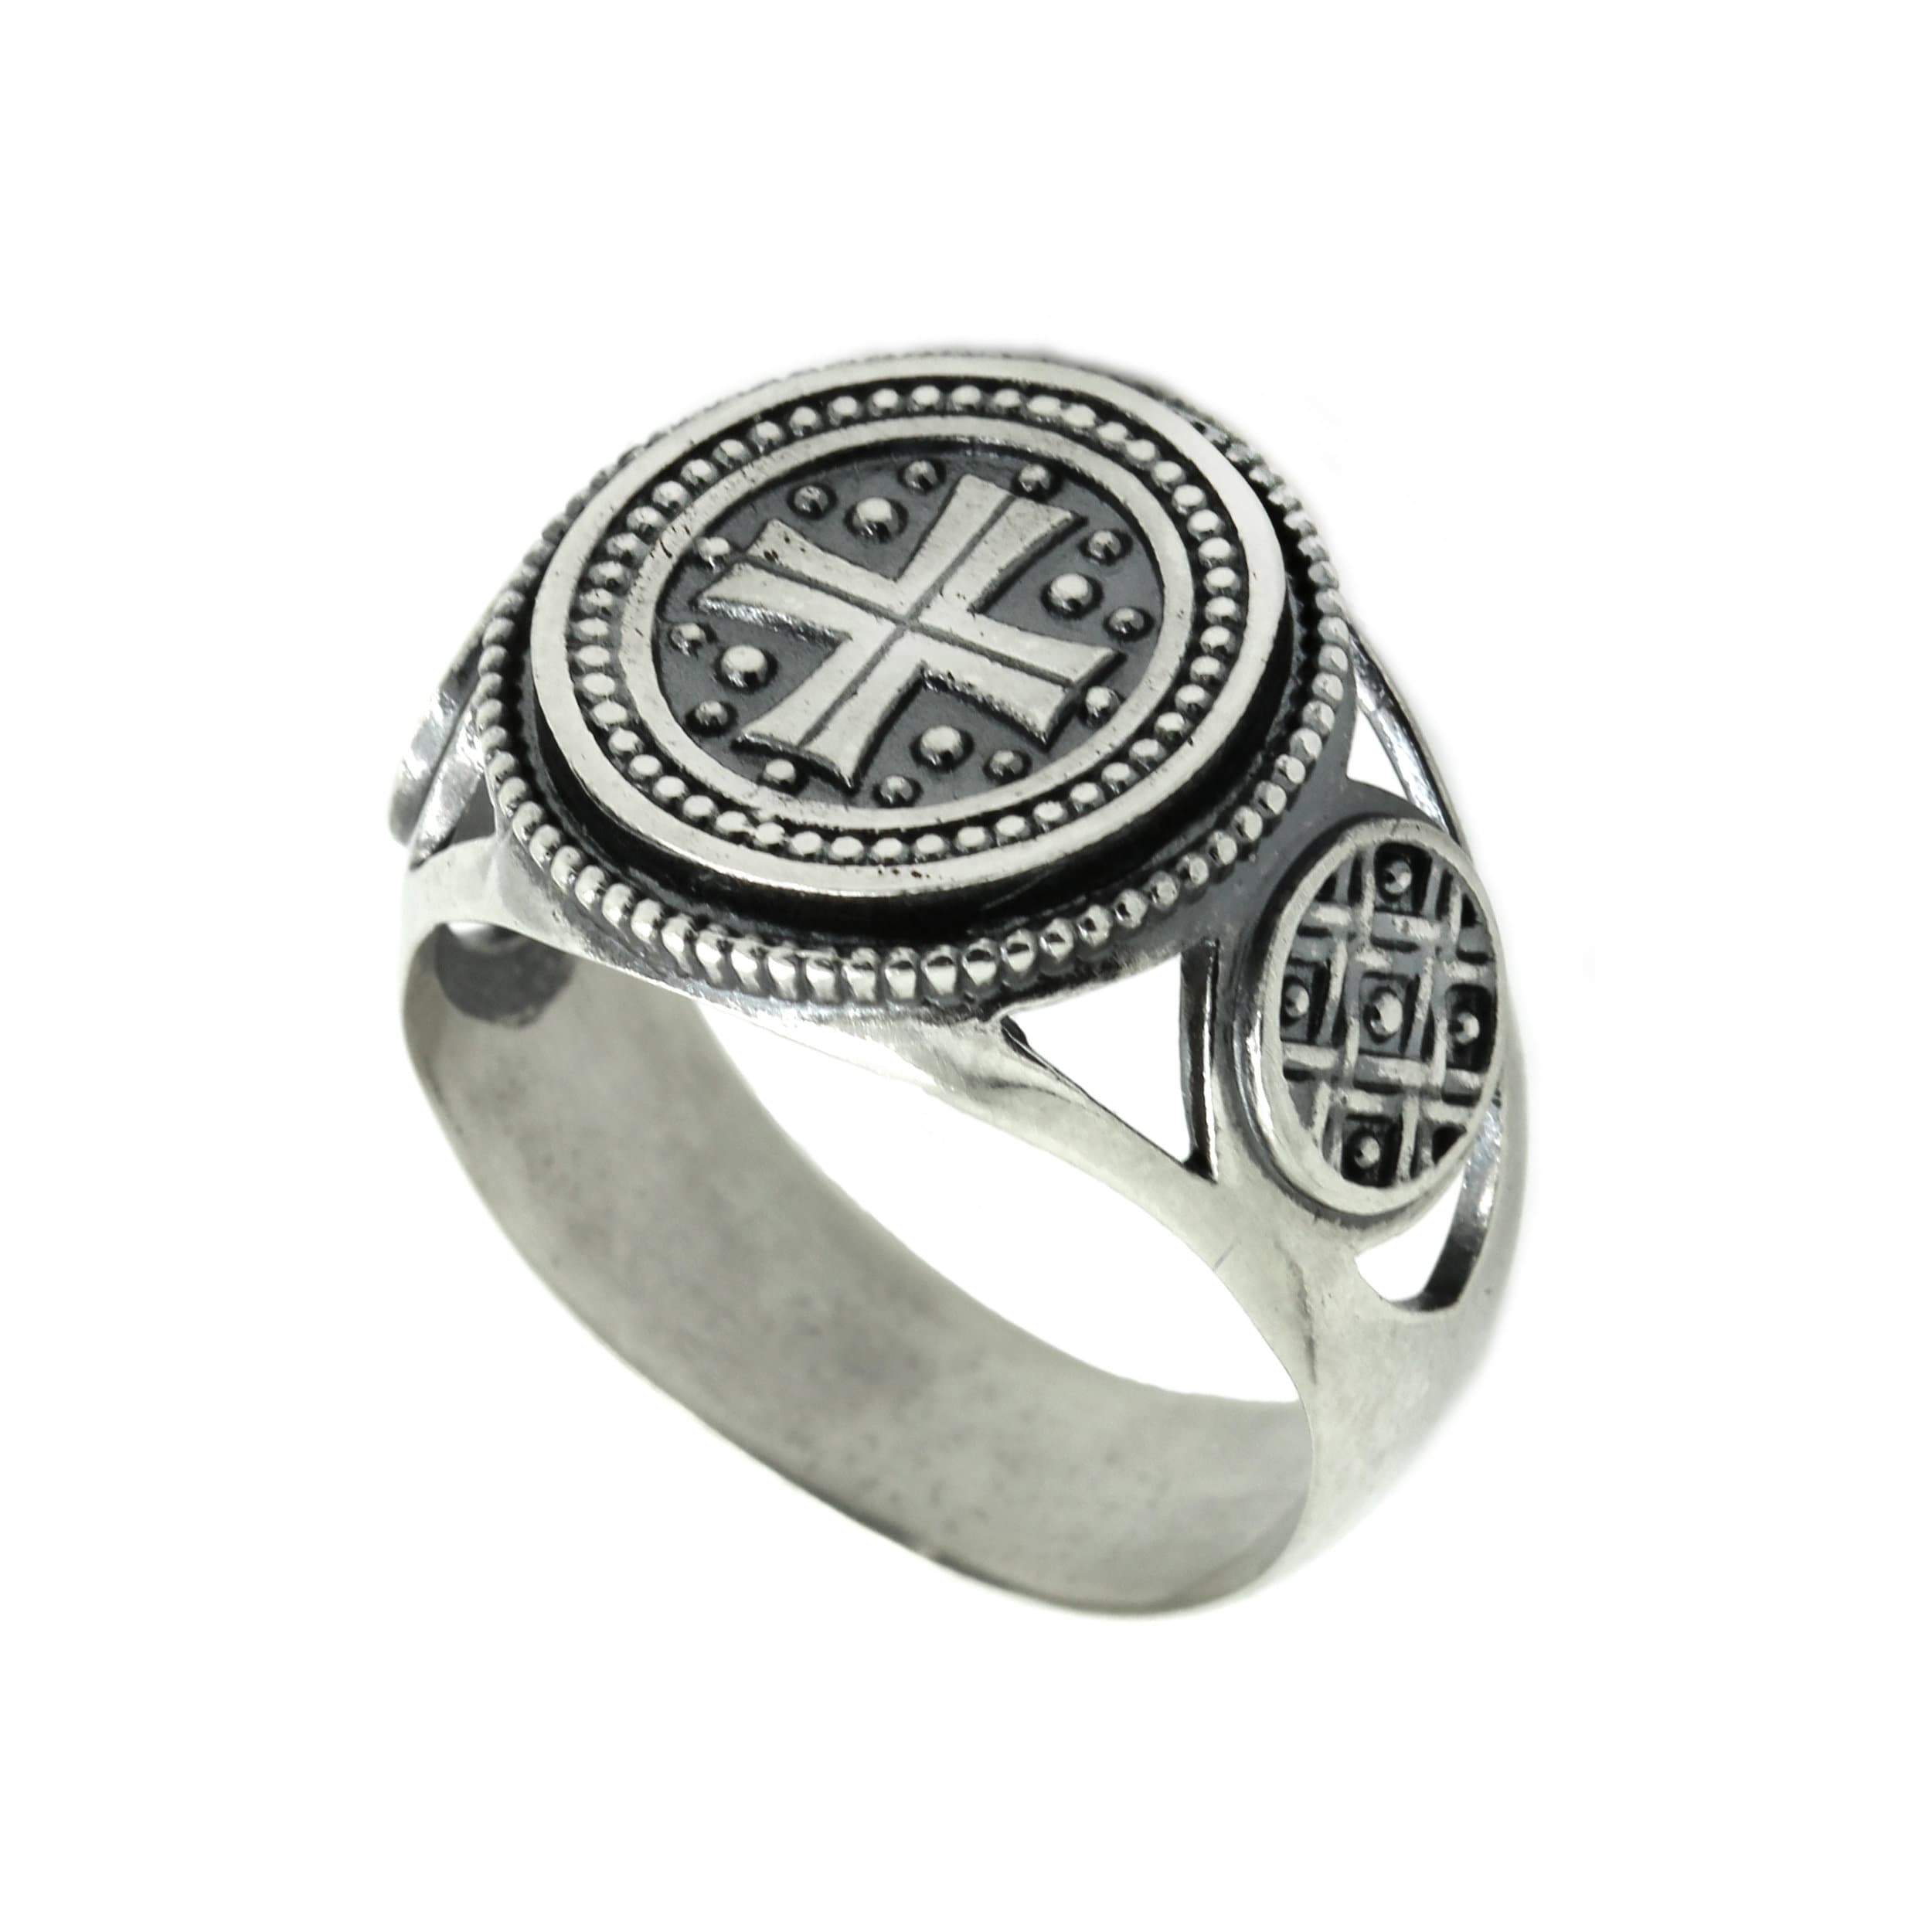 Knight Kross Symbol Men's Ring Sterling Silver 925 SKU30140 Size from 6 to 15 